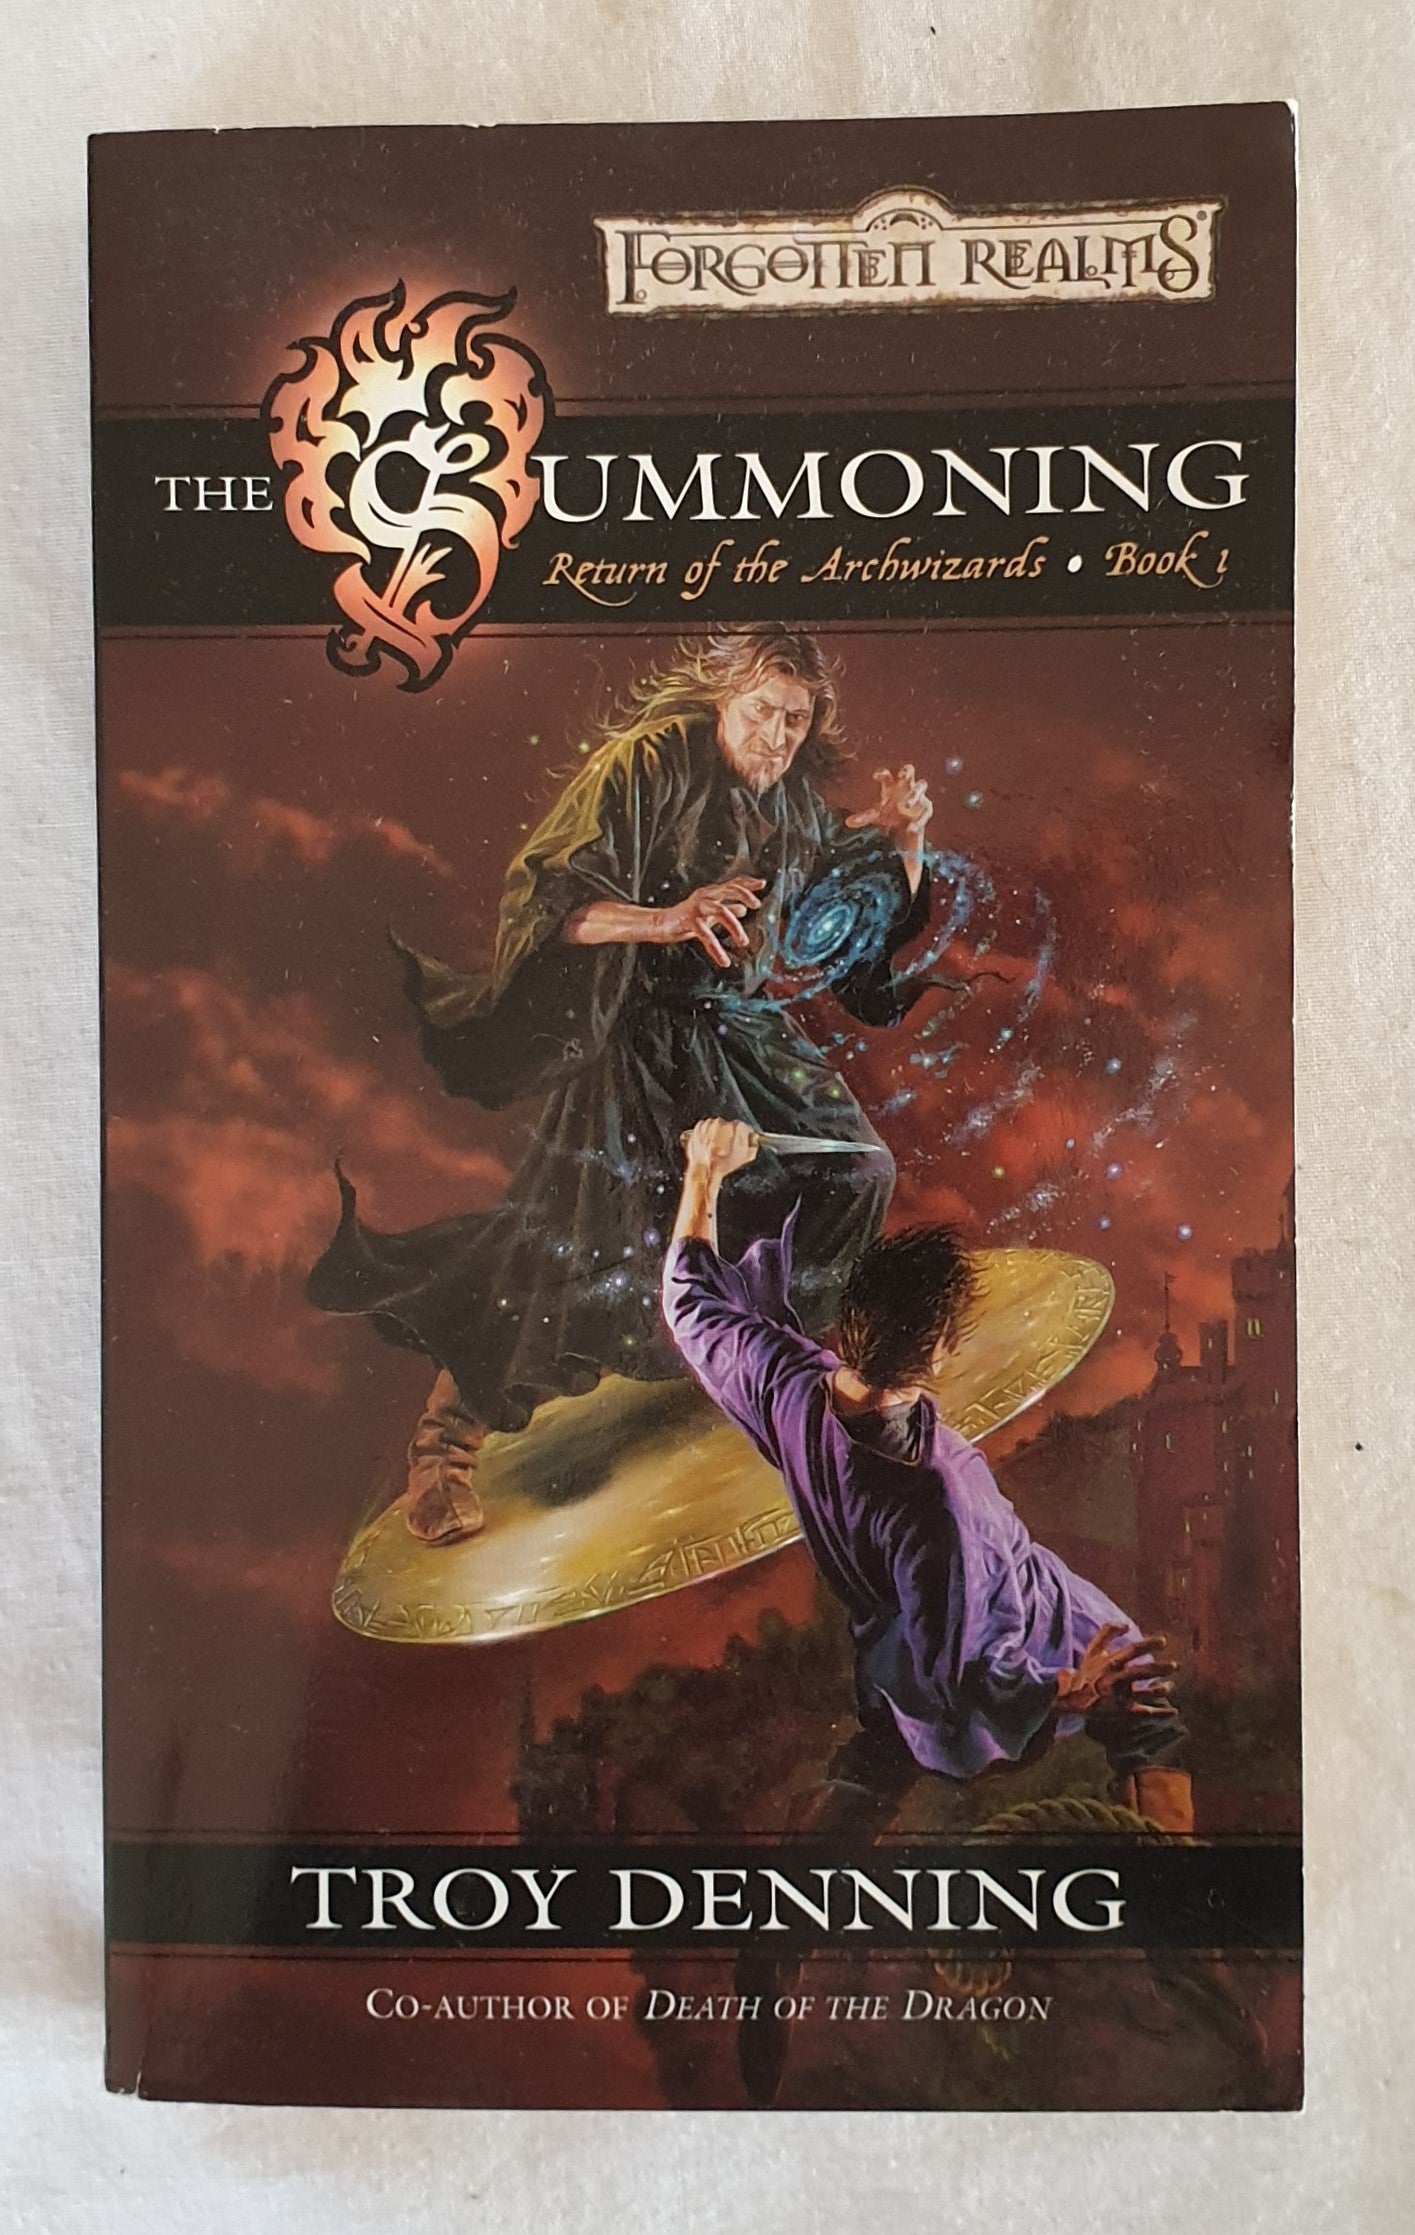 The Summoning by Troy Denning